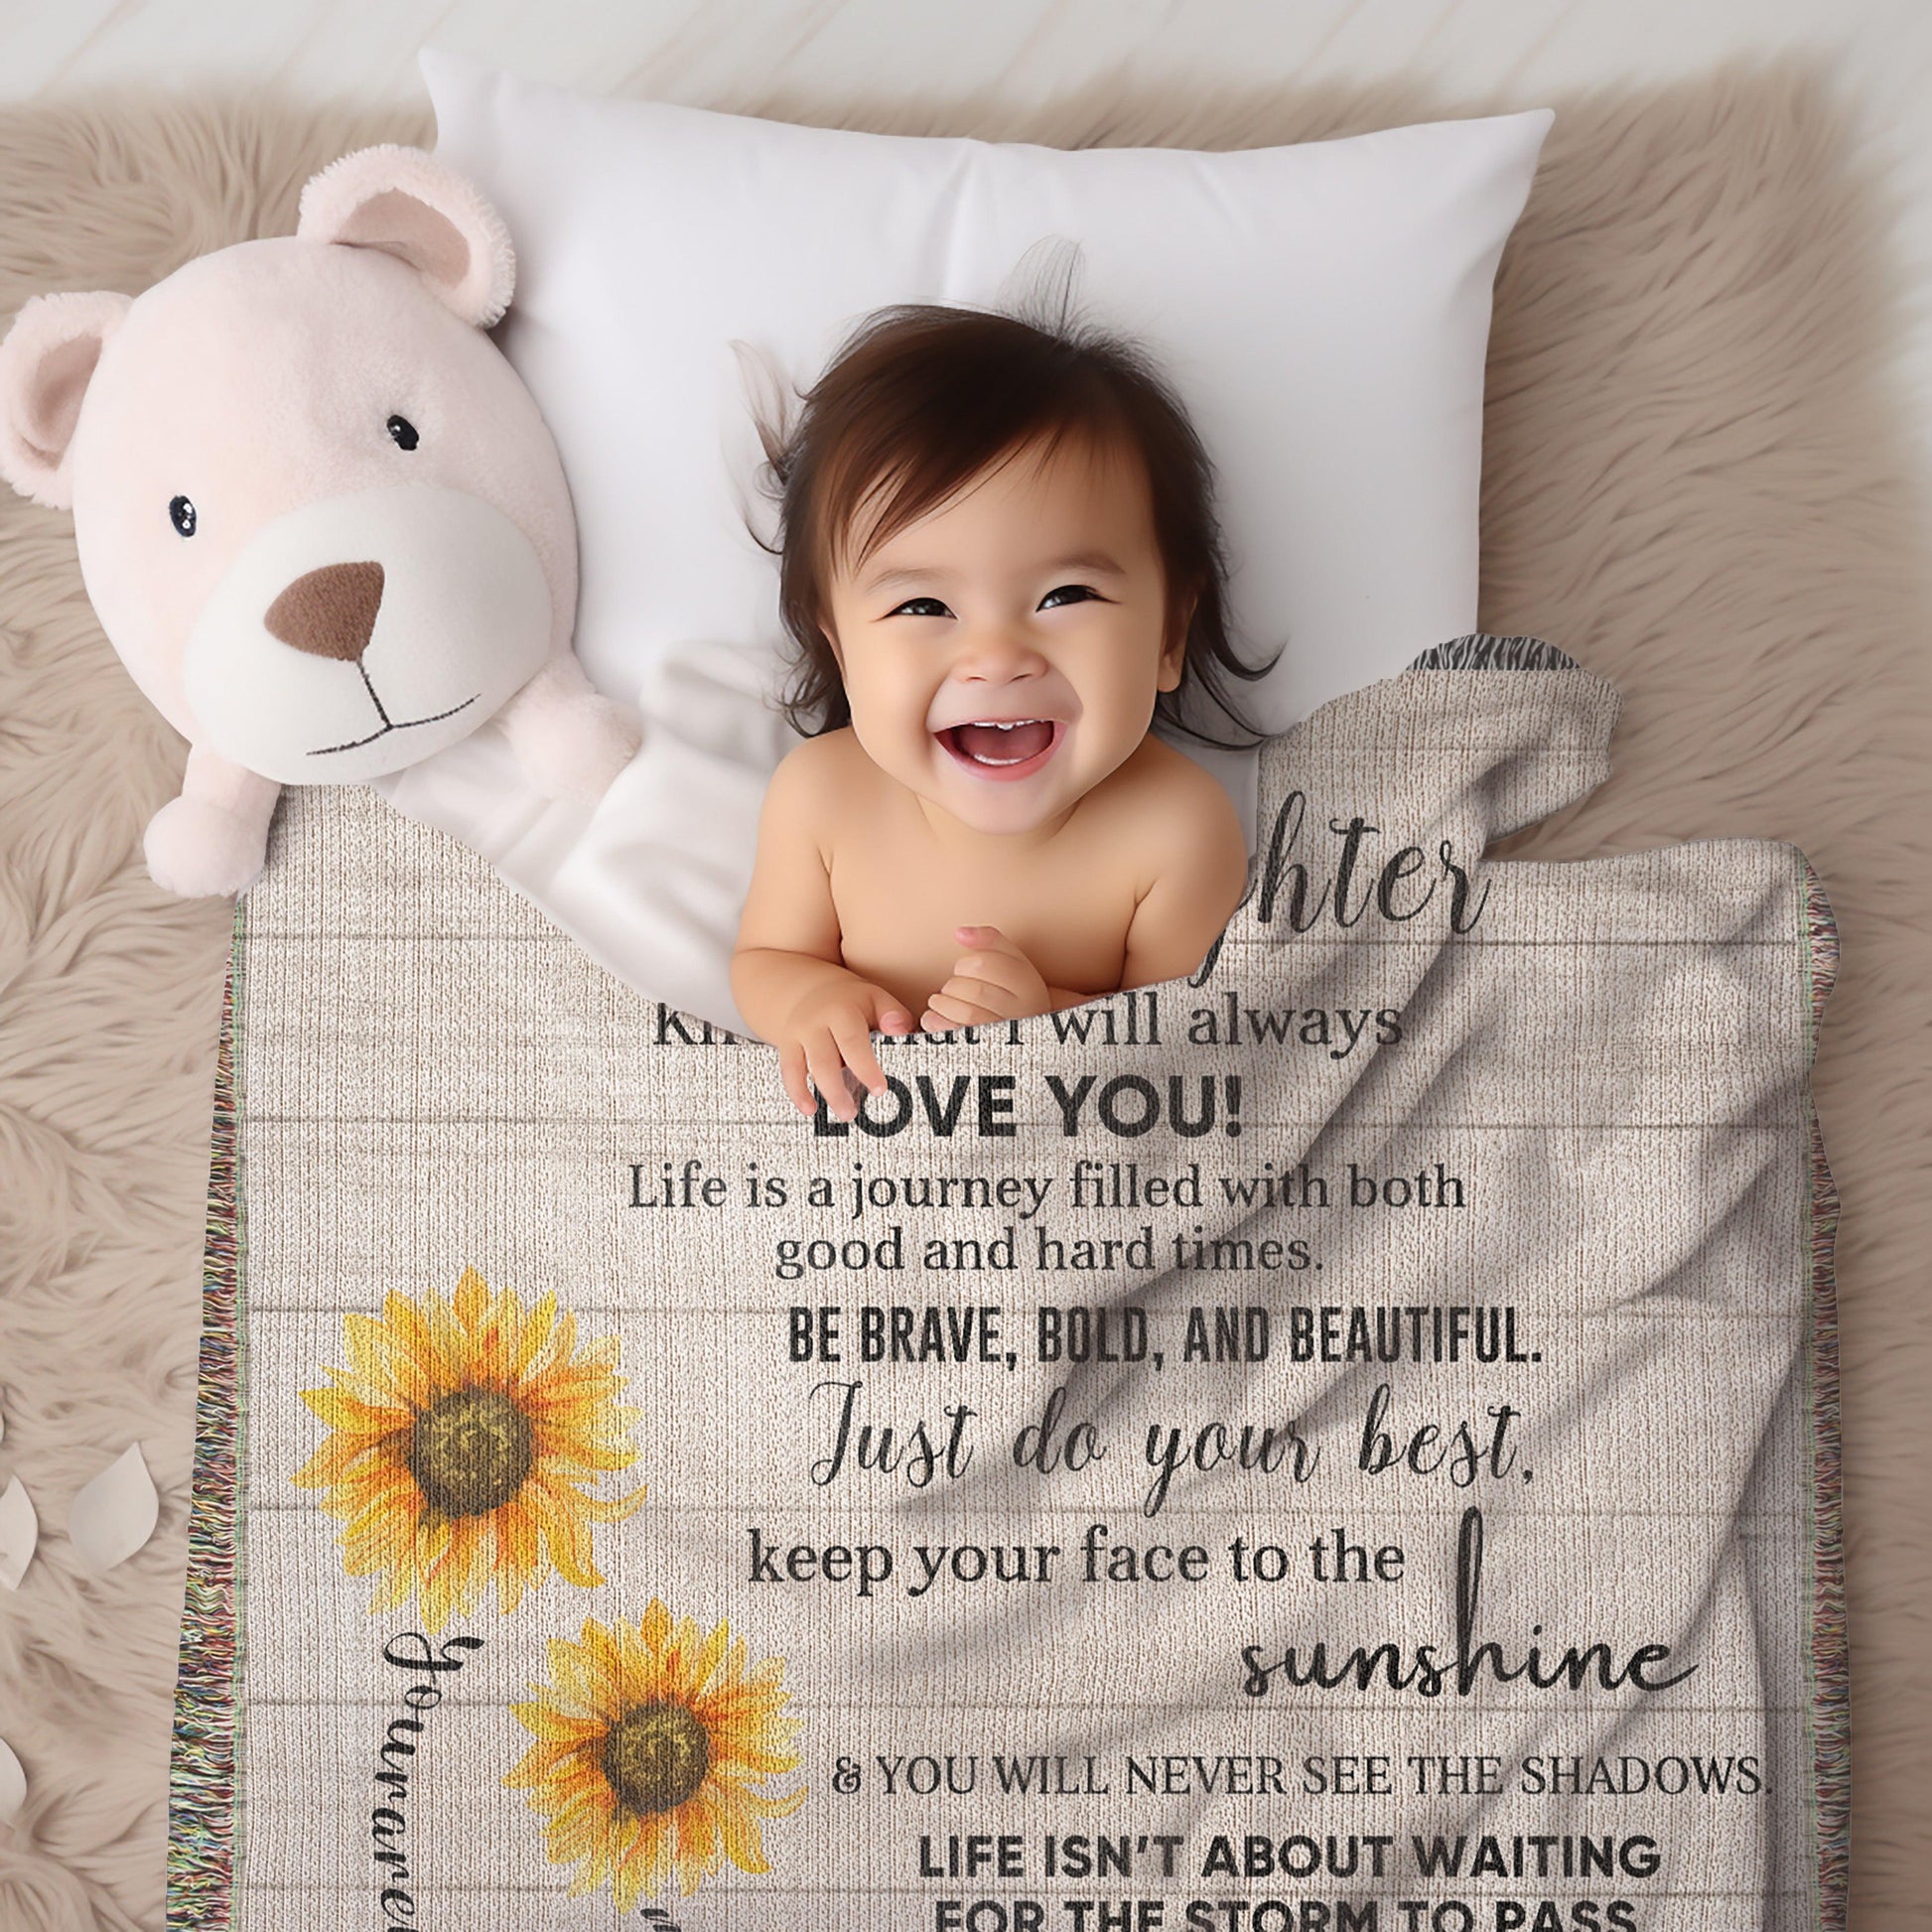 Granddaughter Keepsake Gift - Know that I Will Always Love You - Personalized Heirloom Woven Cotton Blanket - Mallard Moon Gift Shop